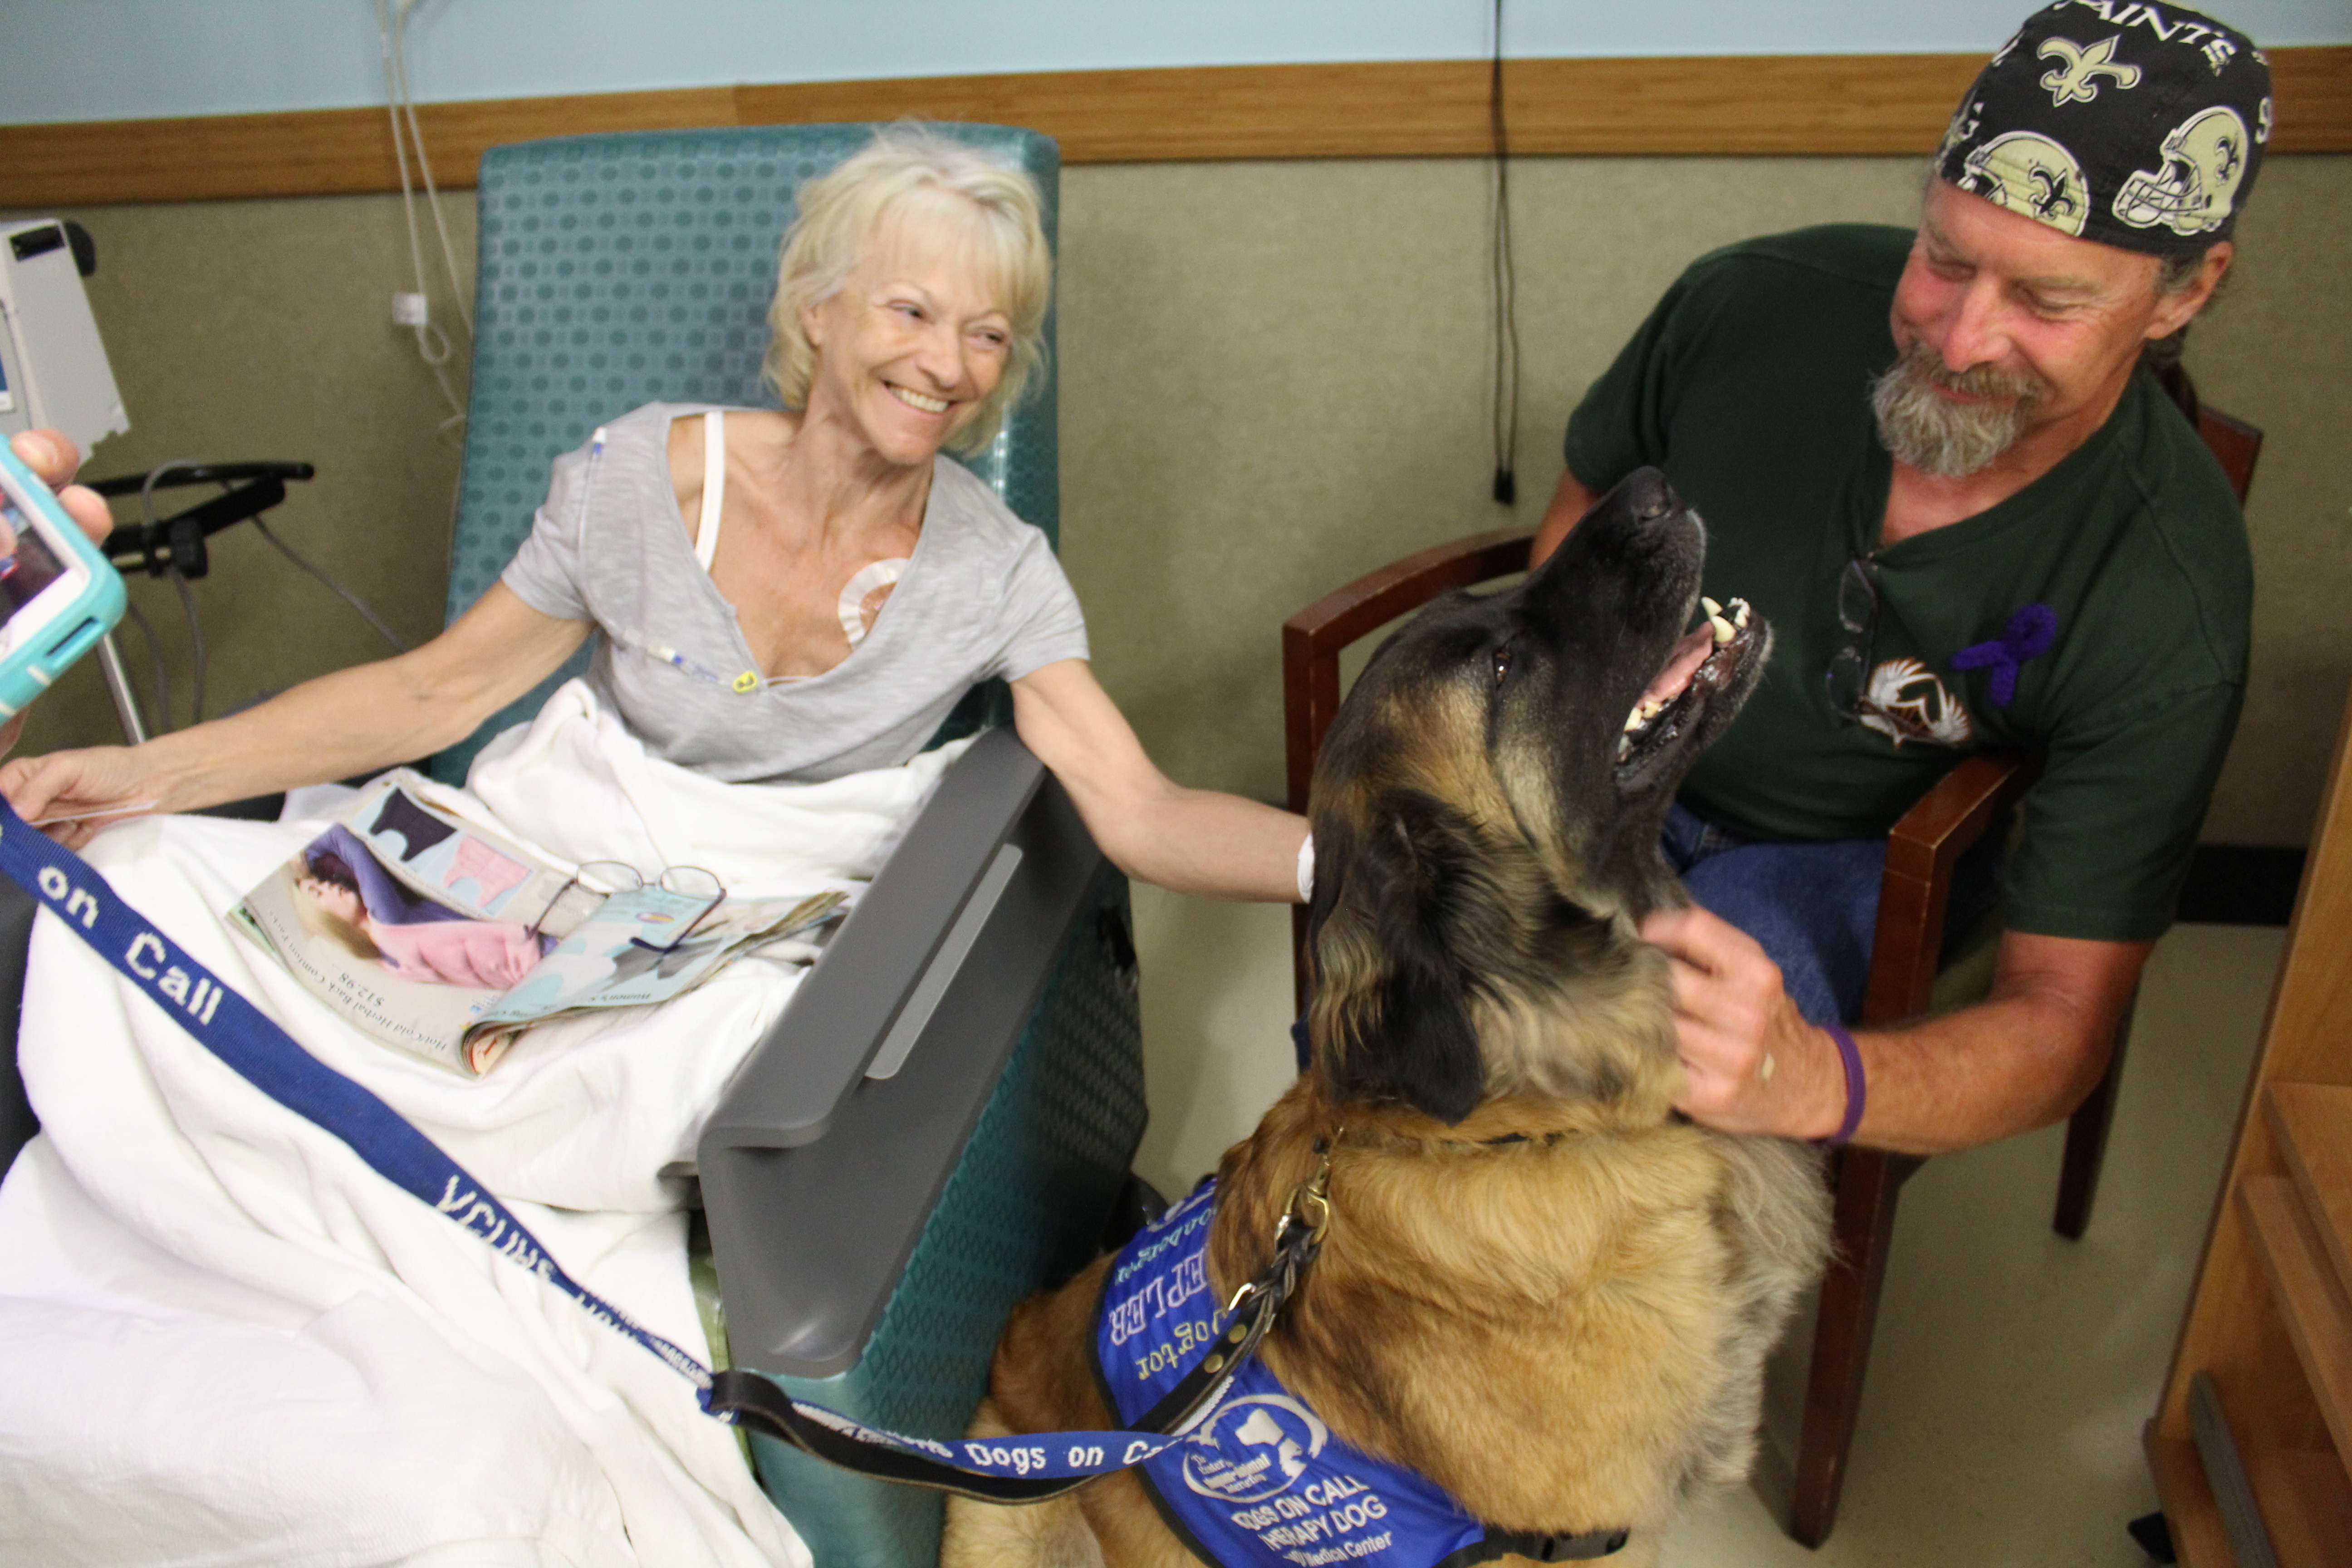 Dogs On Call therapy dog Kepler, a leonberger who is wearing a blue Dogs On Call vest, receives neck scratches from a smiling friend in a chair. Kepler is leaning back in contentment and a patient sitting beside Kepler is smiling and also petting Kepler's head.